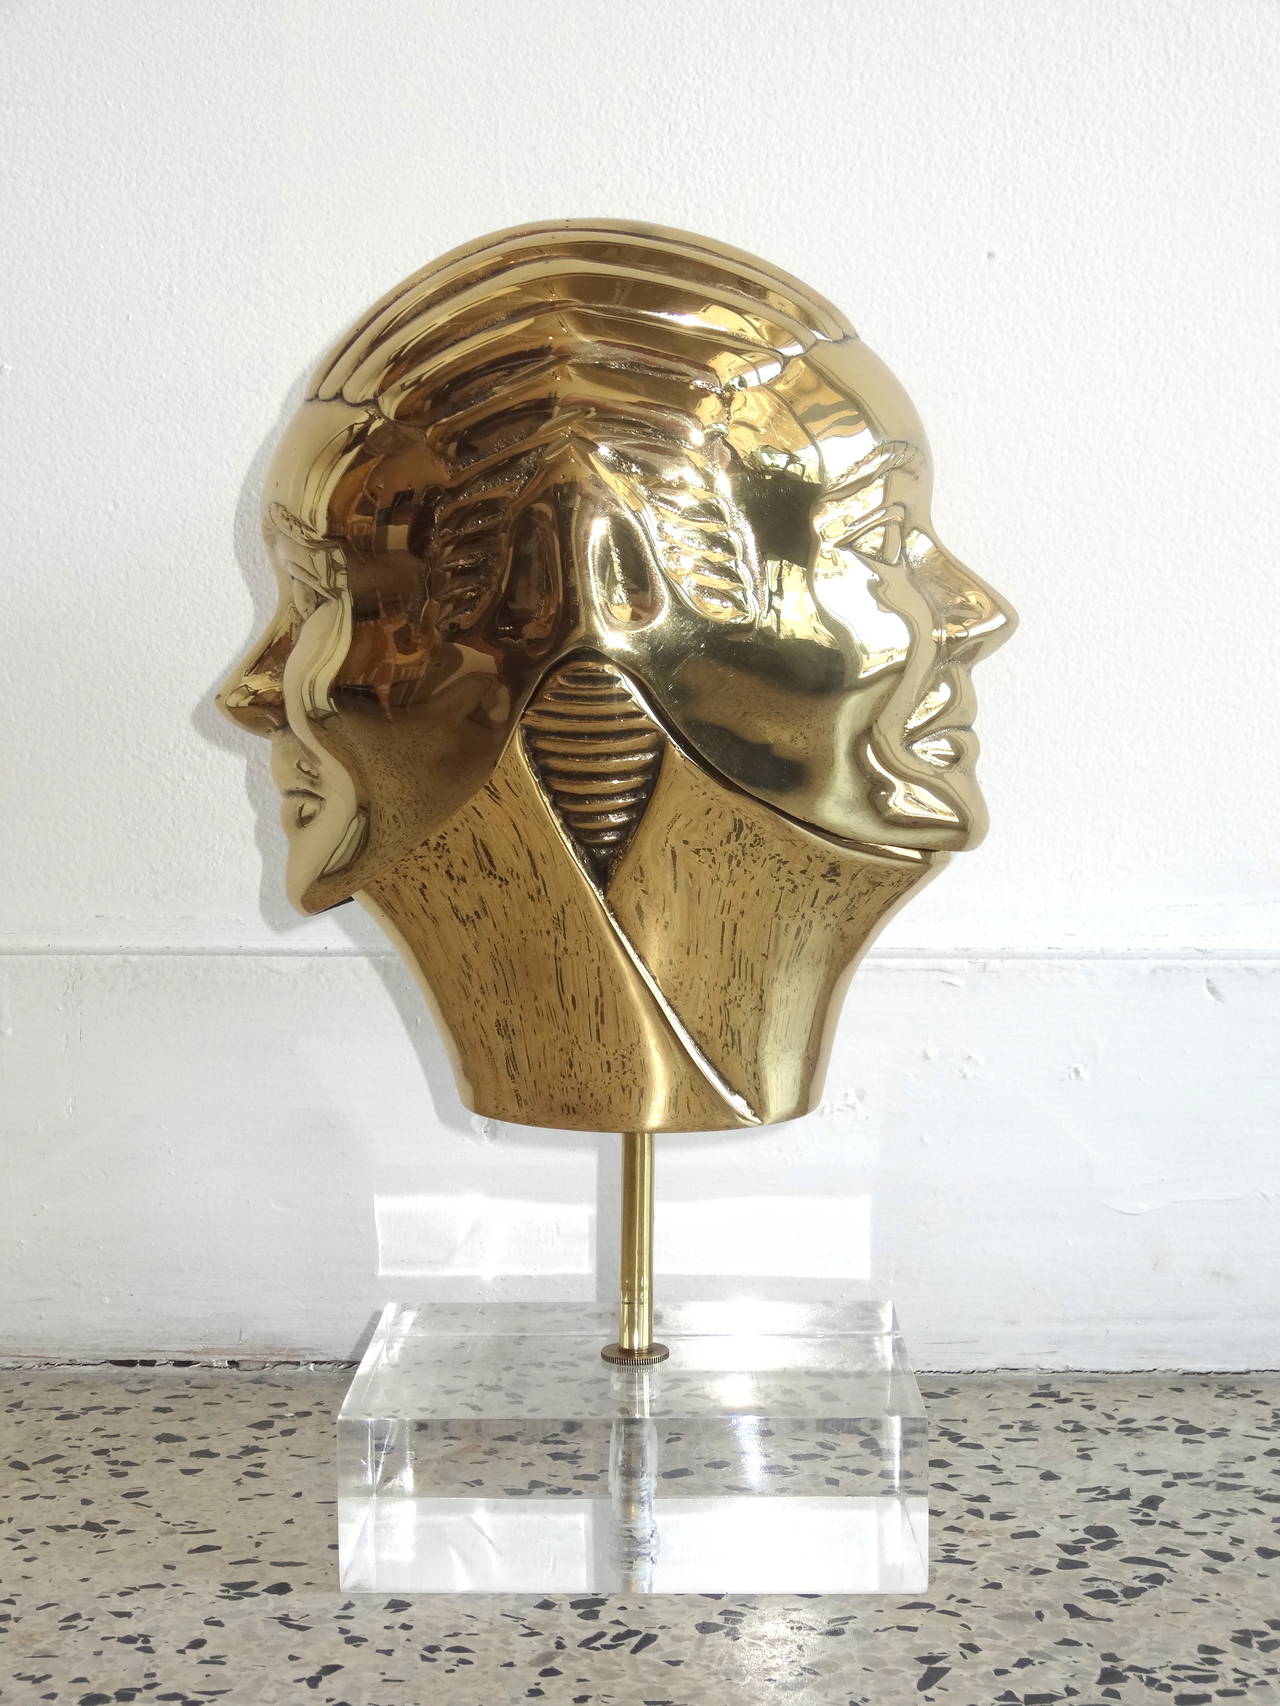 Lidded brass sculpture in a shape of two faced head on Lucite pedestal. Brass is just polished with clear lacquer over polished finish.
Most interesting design with the mirror image faces and removable 